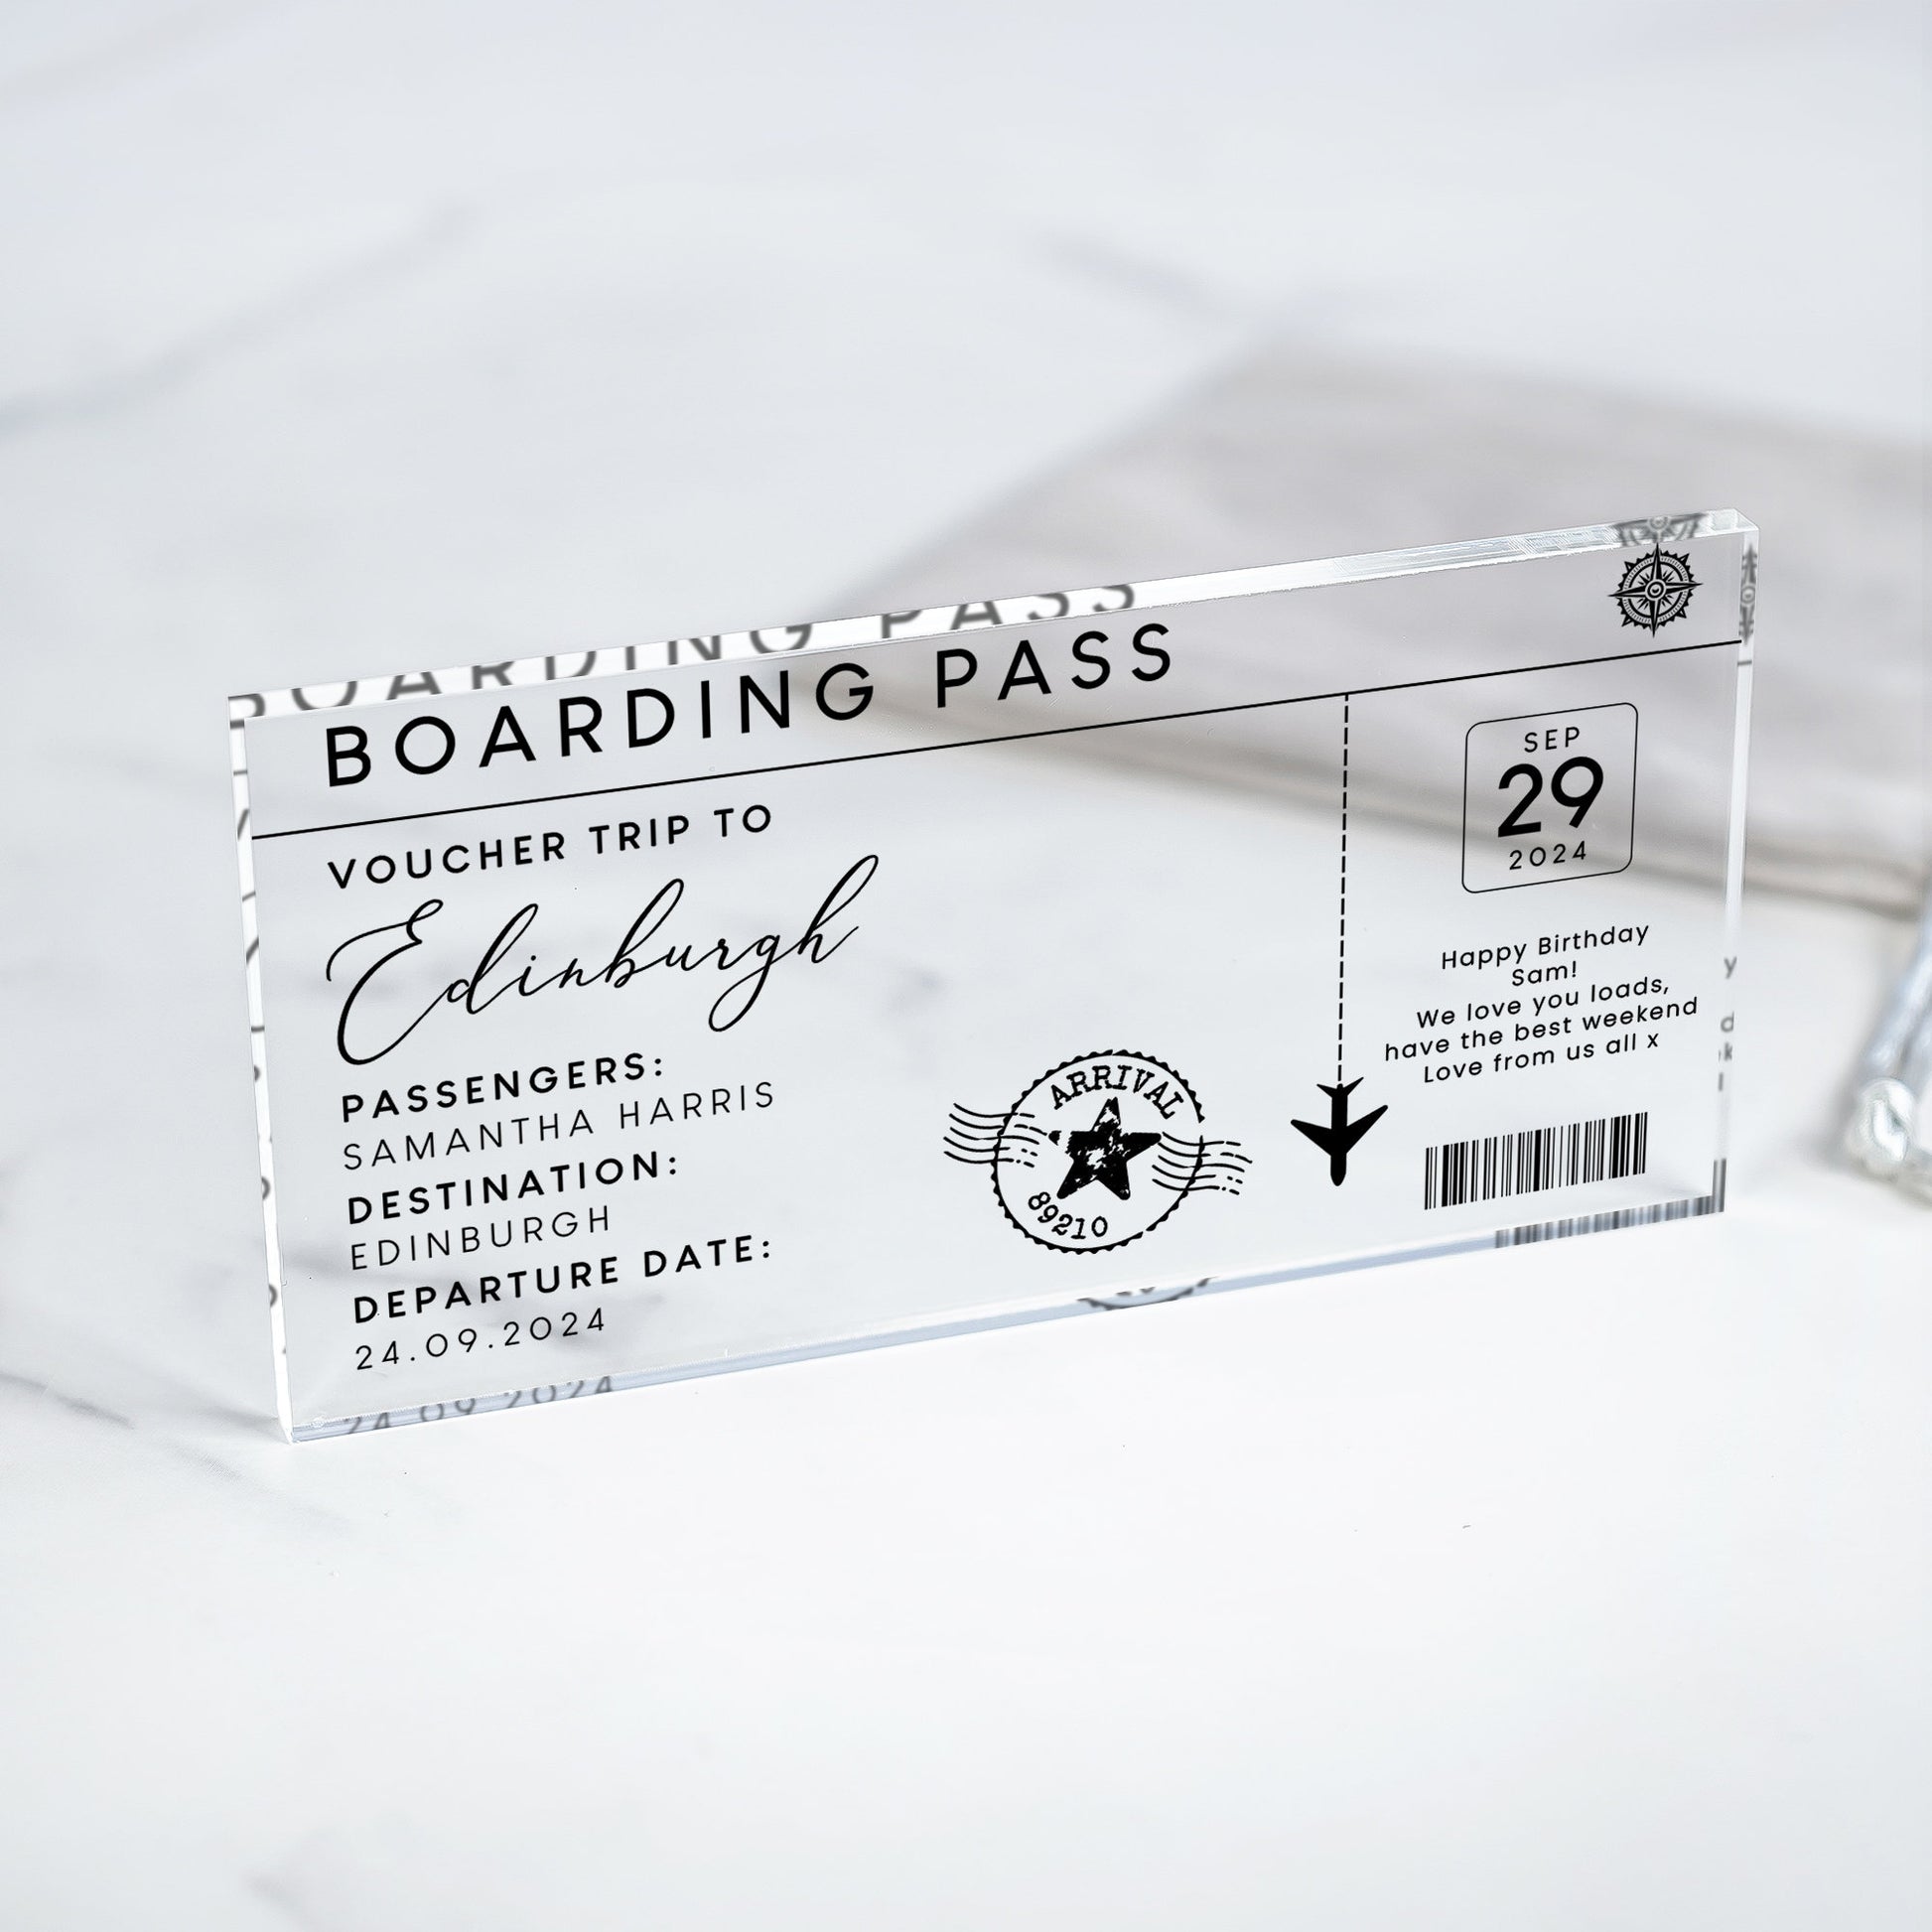 Personalised Surprise Holiday Gift, Boarding Pass Gift Box, Surprise Reveal Holiday Ticket, Special Ticket, Birthday Gift, Anniversary Gift,